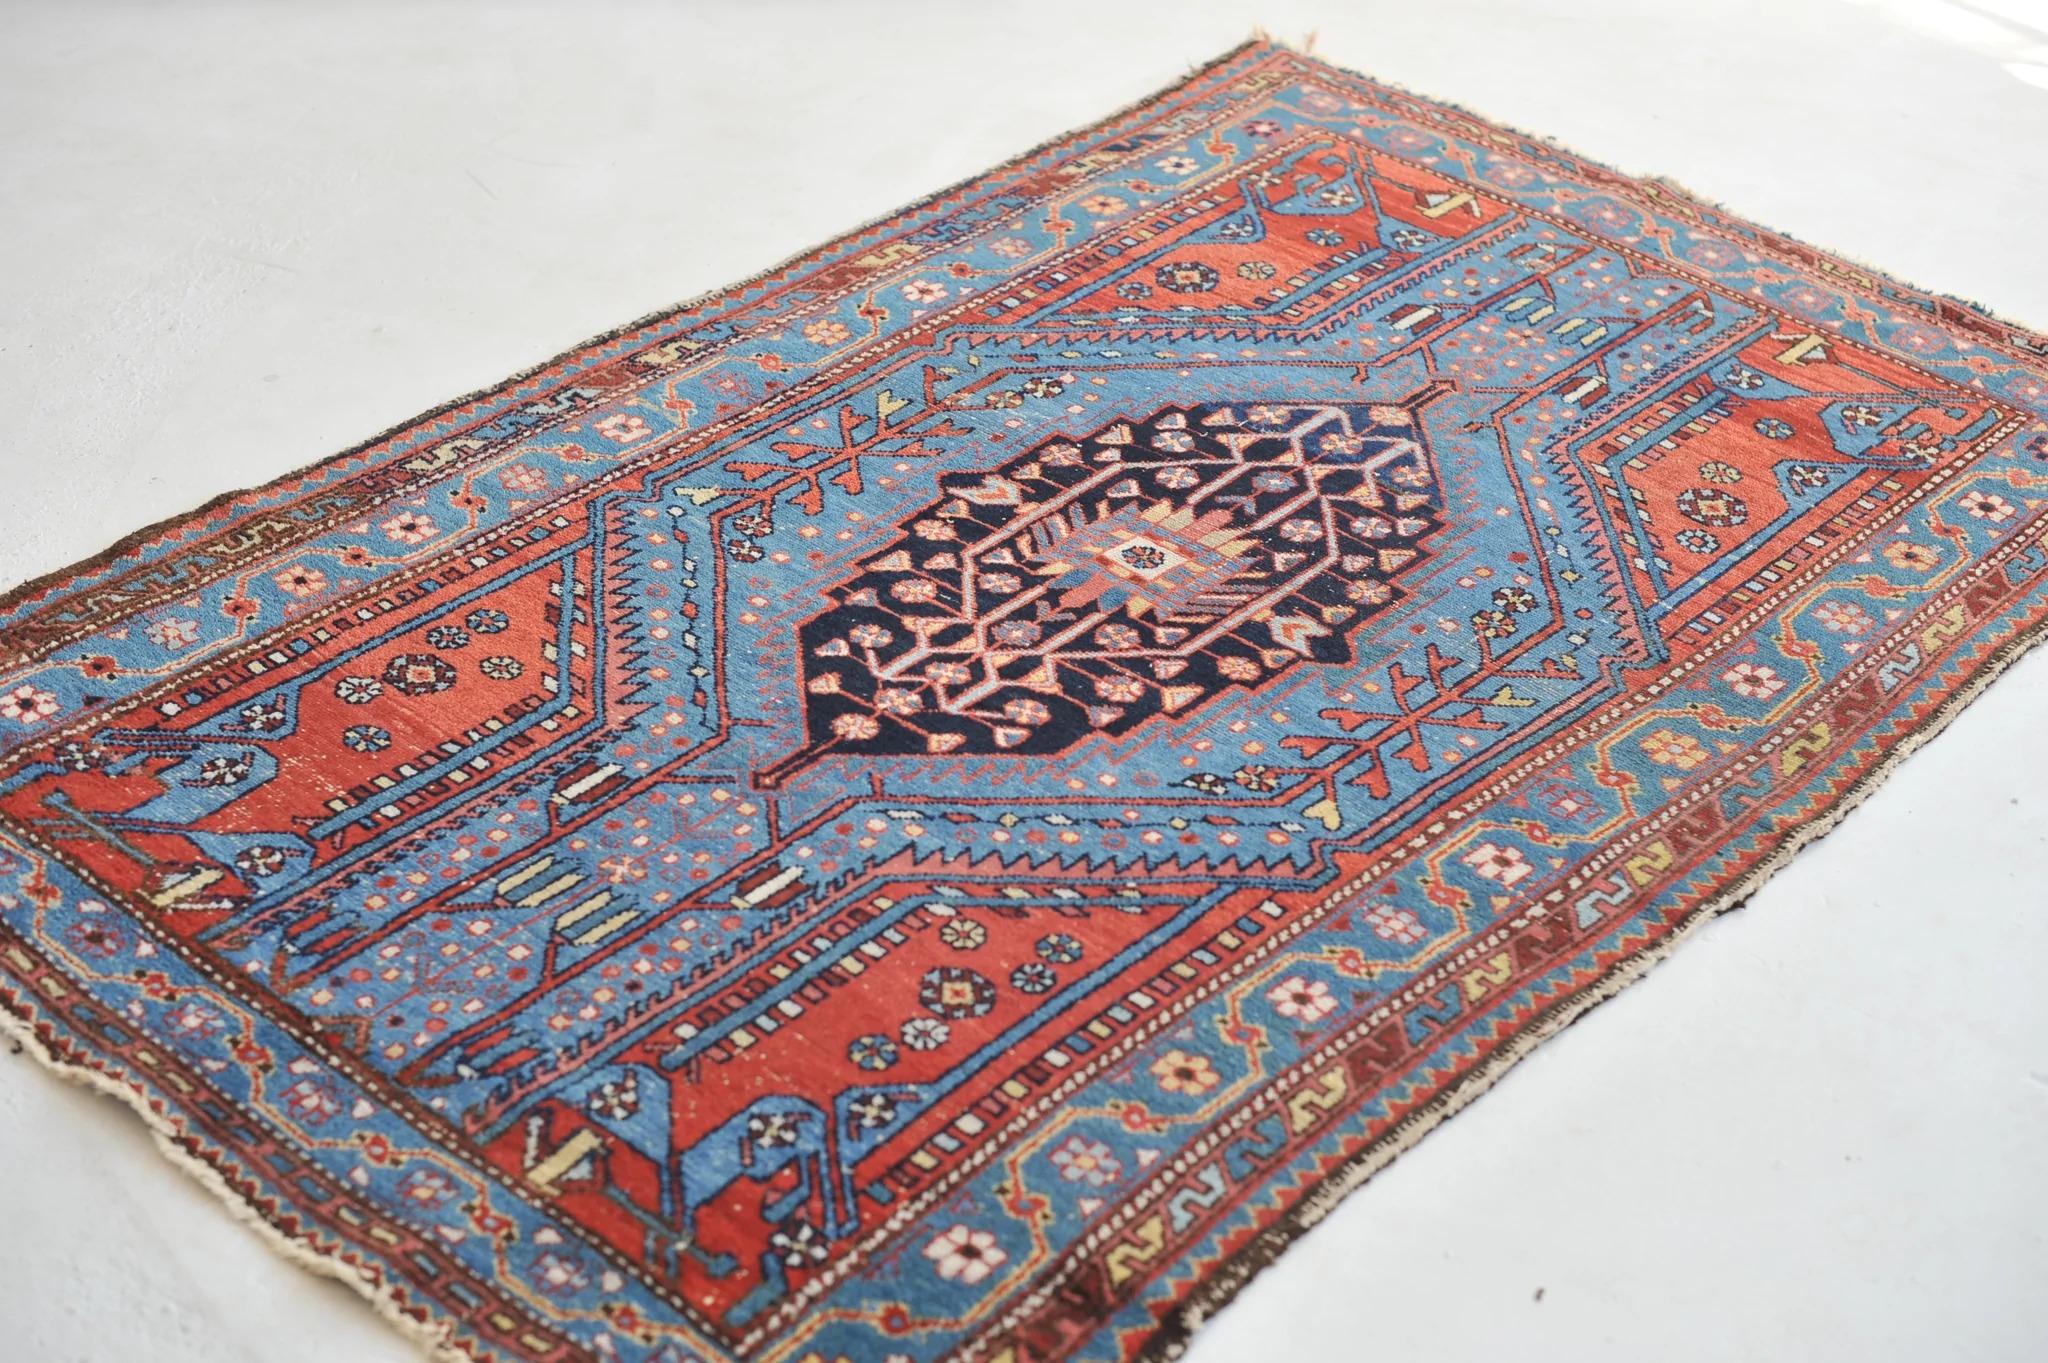 Electrifying Blue & Lovely Strawberry Antique

Size: 4 x 6
Age: Antique
Pile: Low

This rug is one-of-a-kind, only one in the world, no others are available.

Because of the nature and age of these older/antique handmade pieces, irregularities and